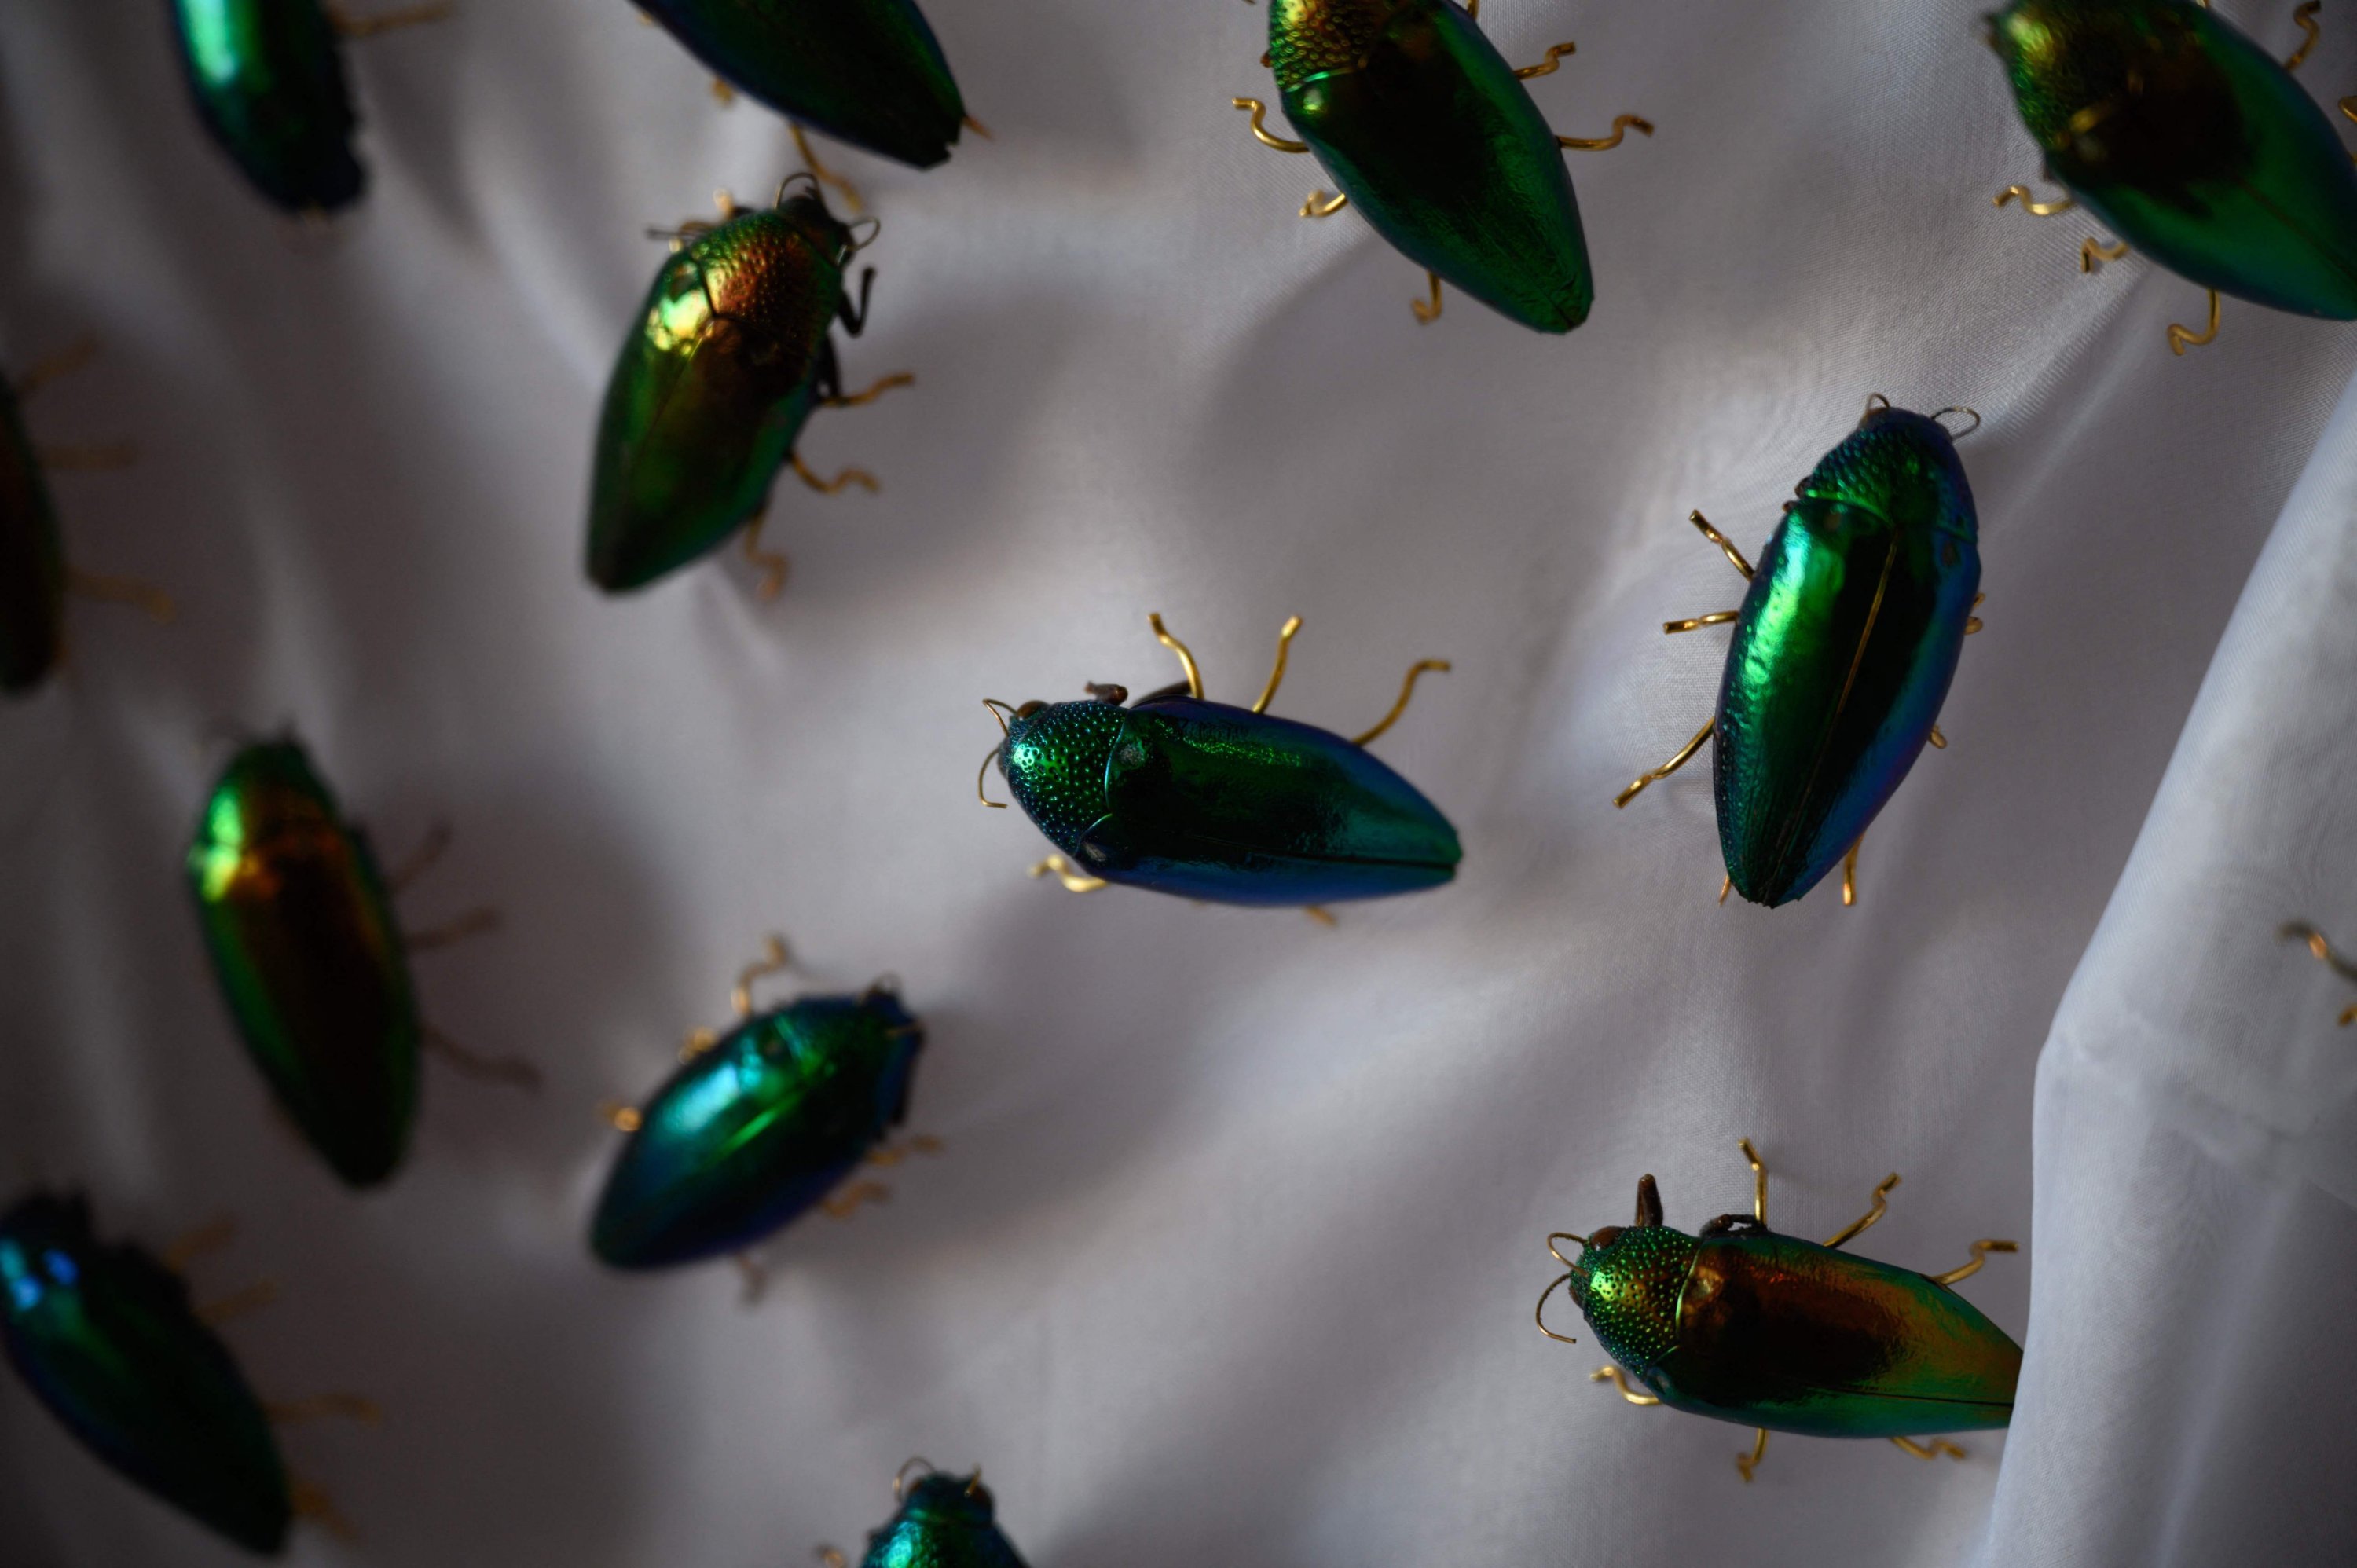 A Dauphinette garment featuring beetles is displayed at their studio in New York, U.S., Feb. 9, 2022. (AFP Photo)